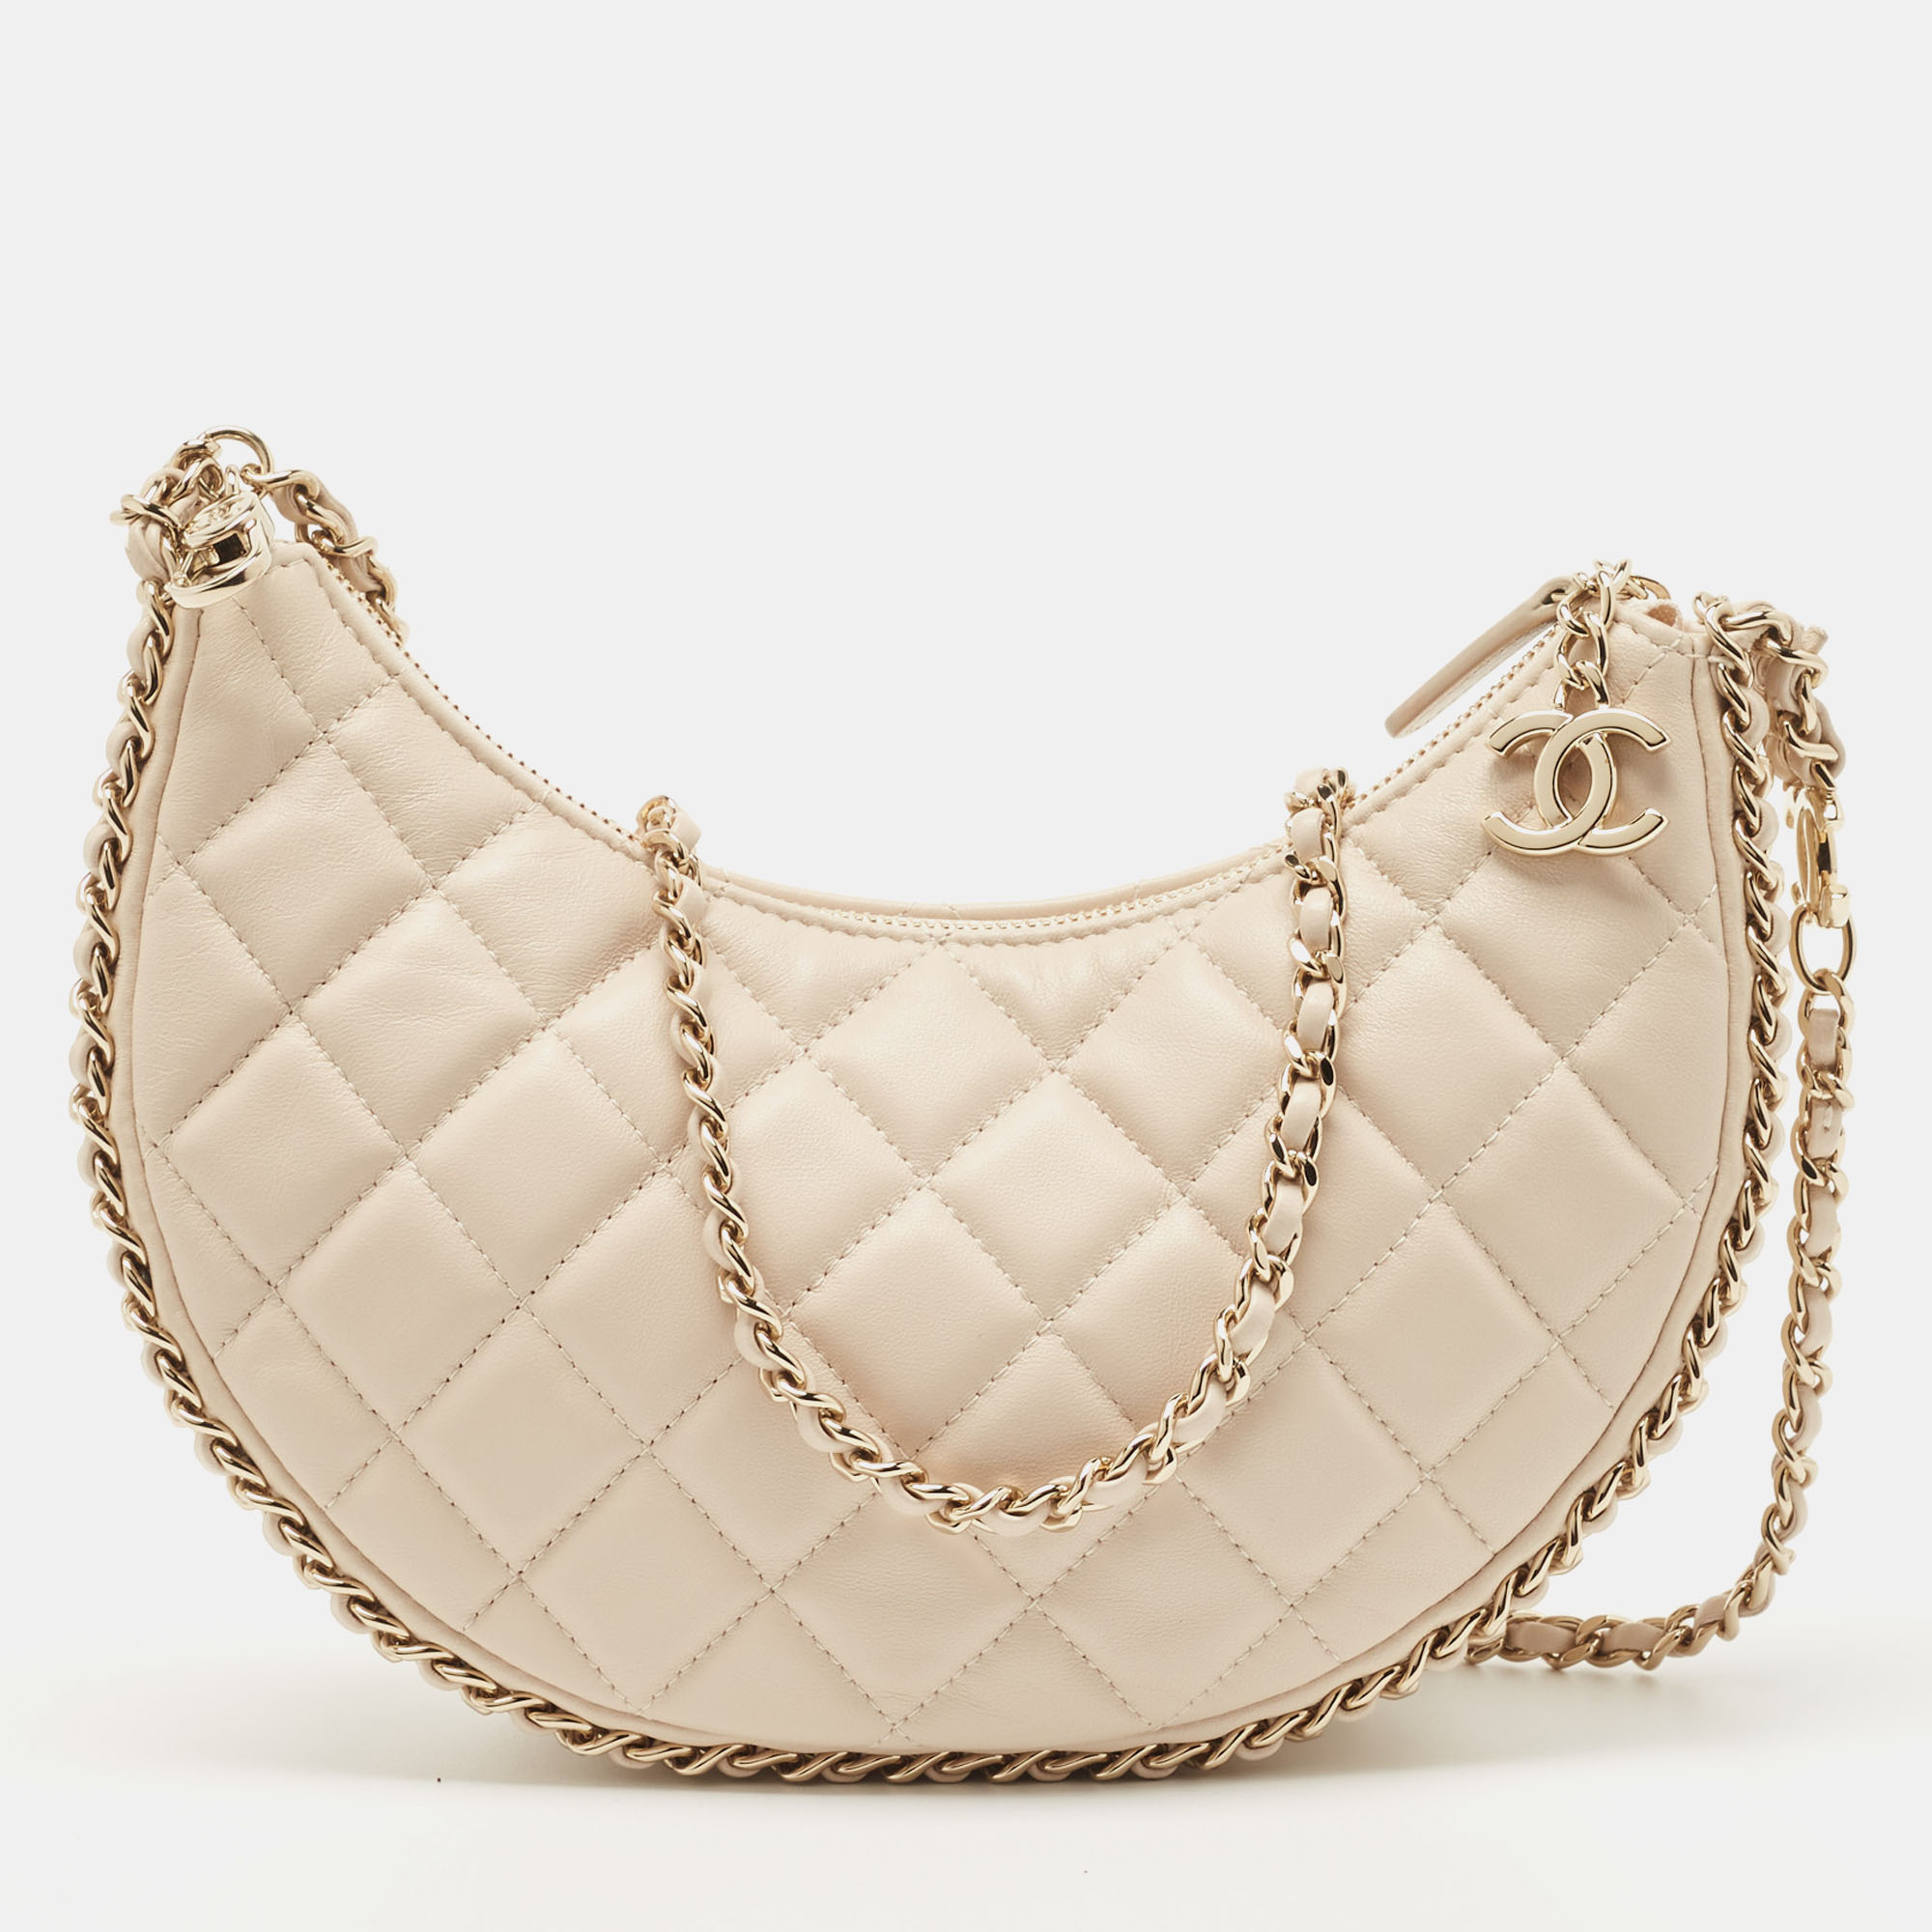 Chanel Light Beige Quilted Leather Chain Around Shoulder Bag